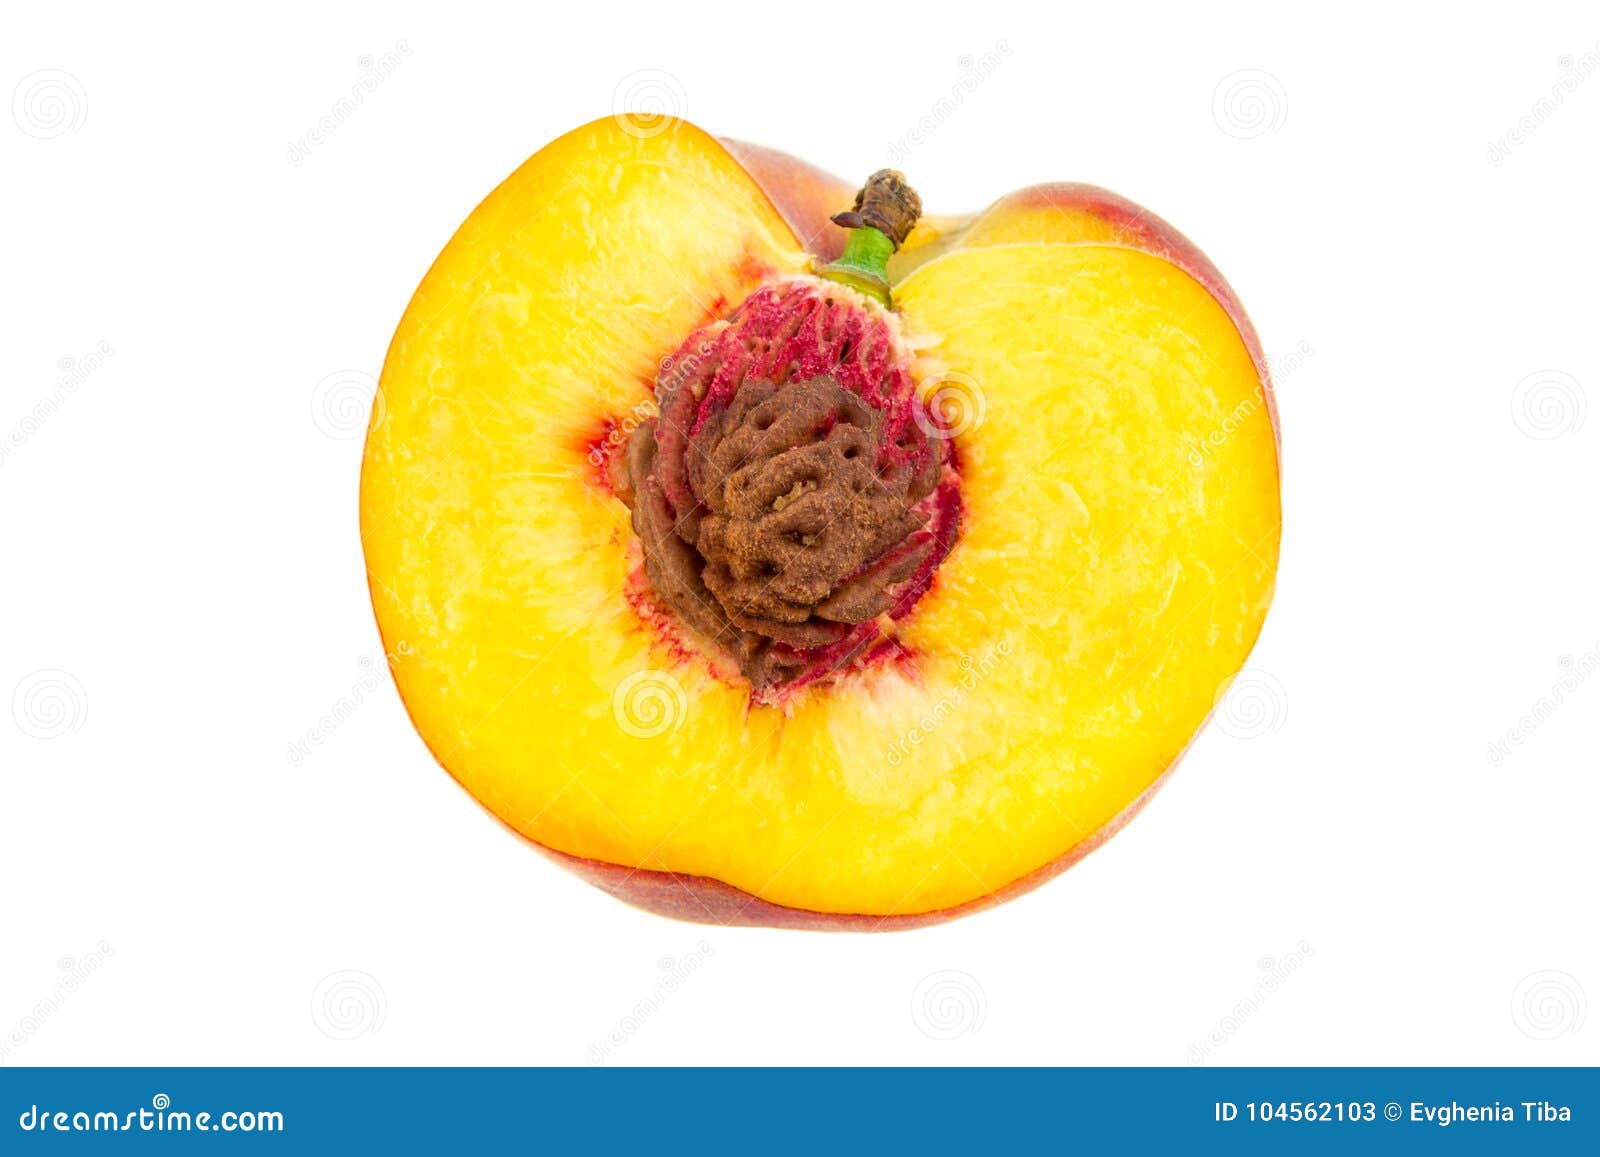 1 033 Peach Pit Photos Free Royalty Free Stock Photos From Dreamstime